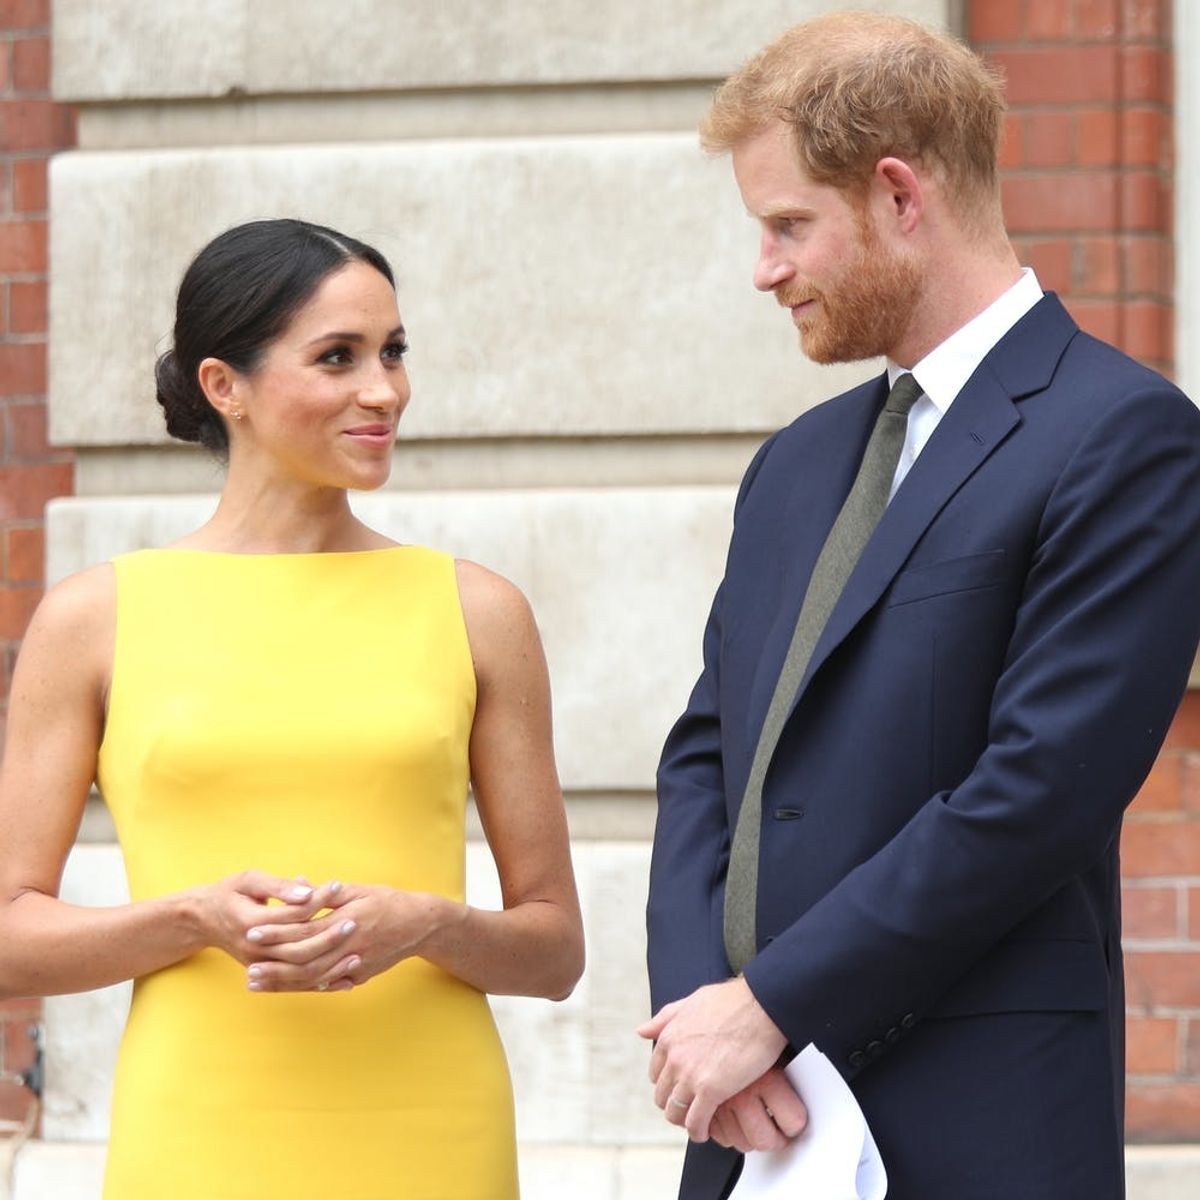 People Think Meghan Markle Might Be Developing a British Accent